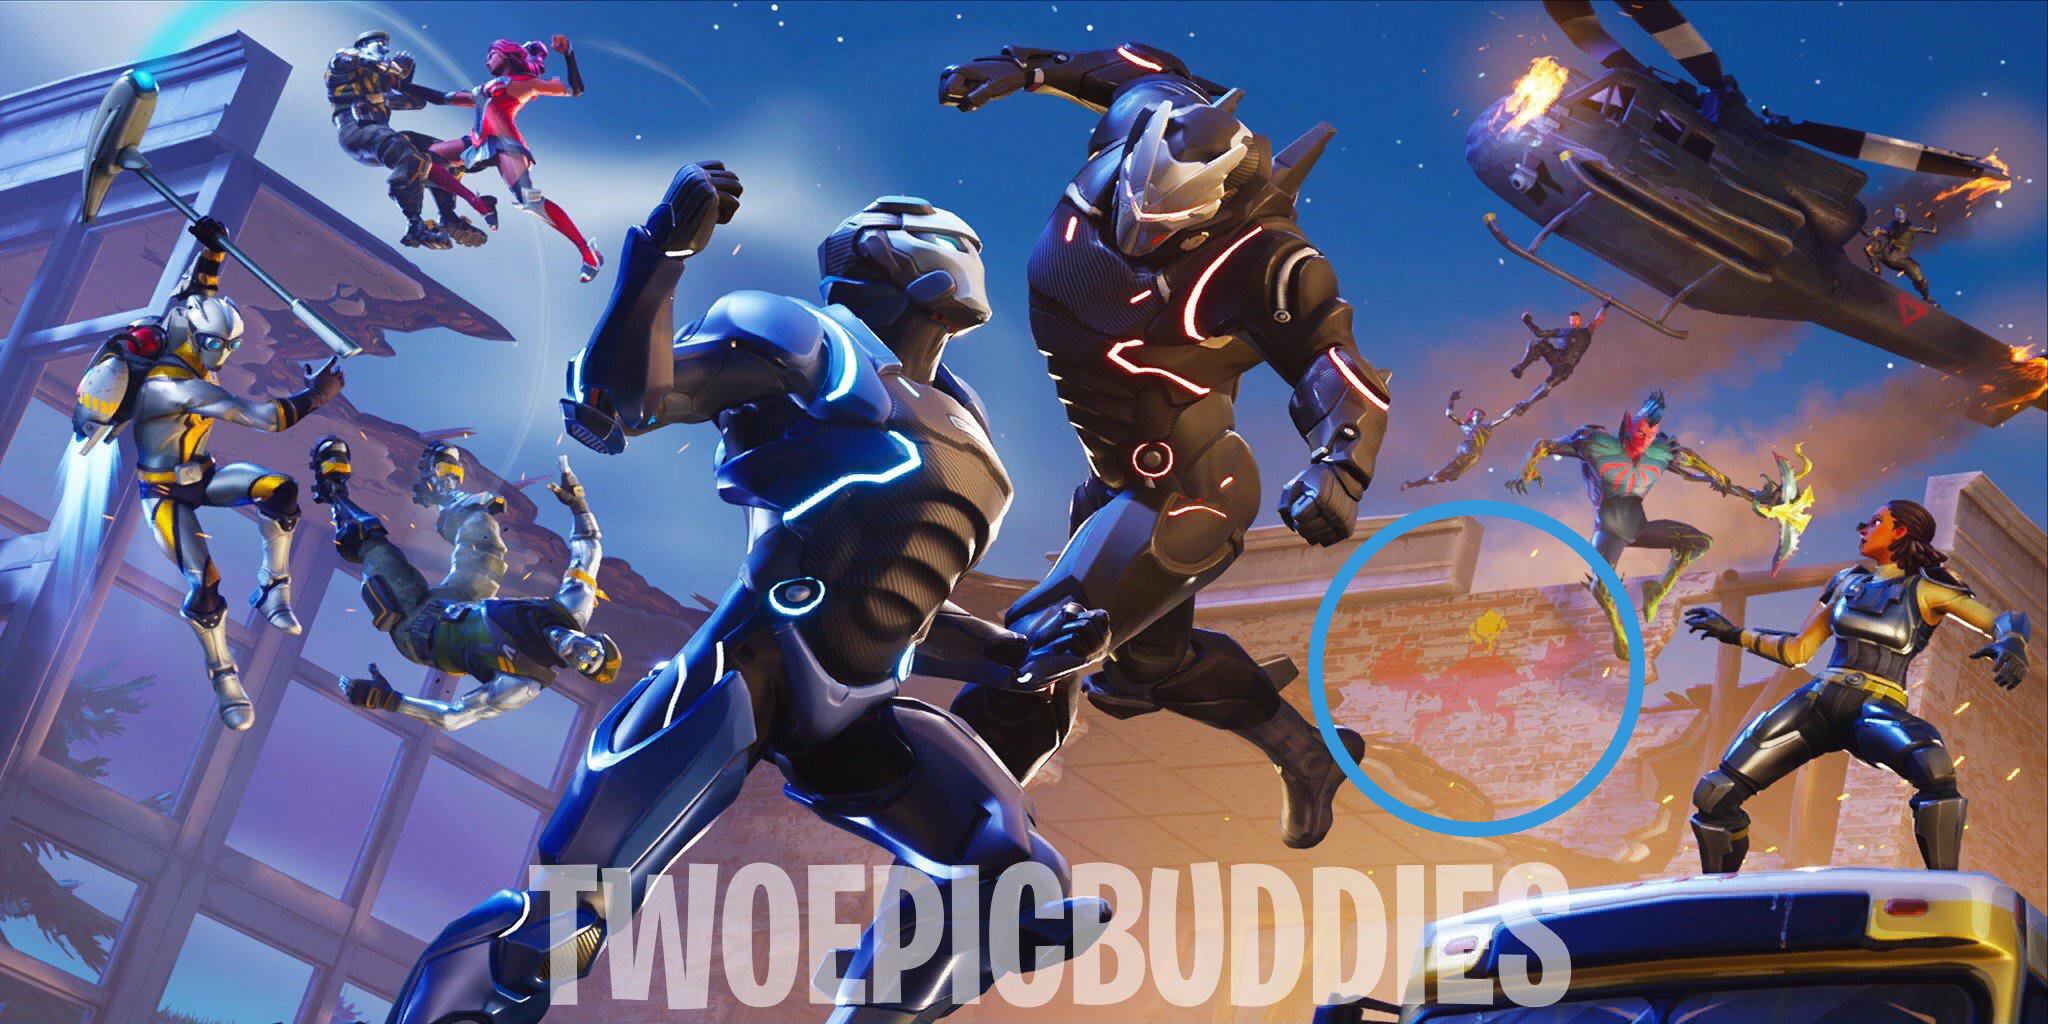 Fortnite Season 4 Week 5 Challenges Guide Pro Game Guides - thanks to the twoepicbuddies twitt!   er for revealing the loading screen